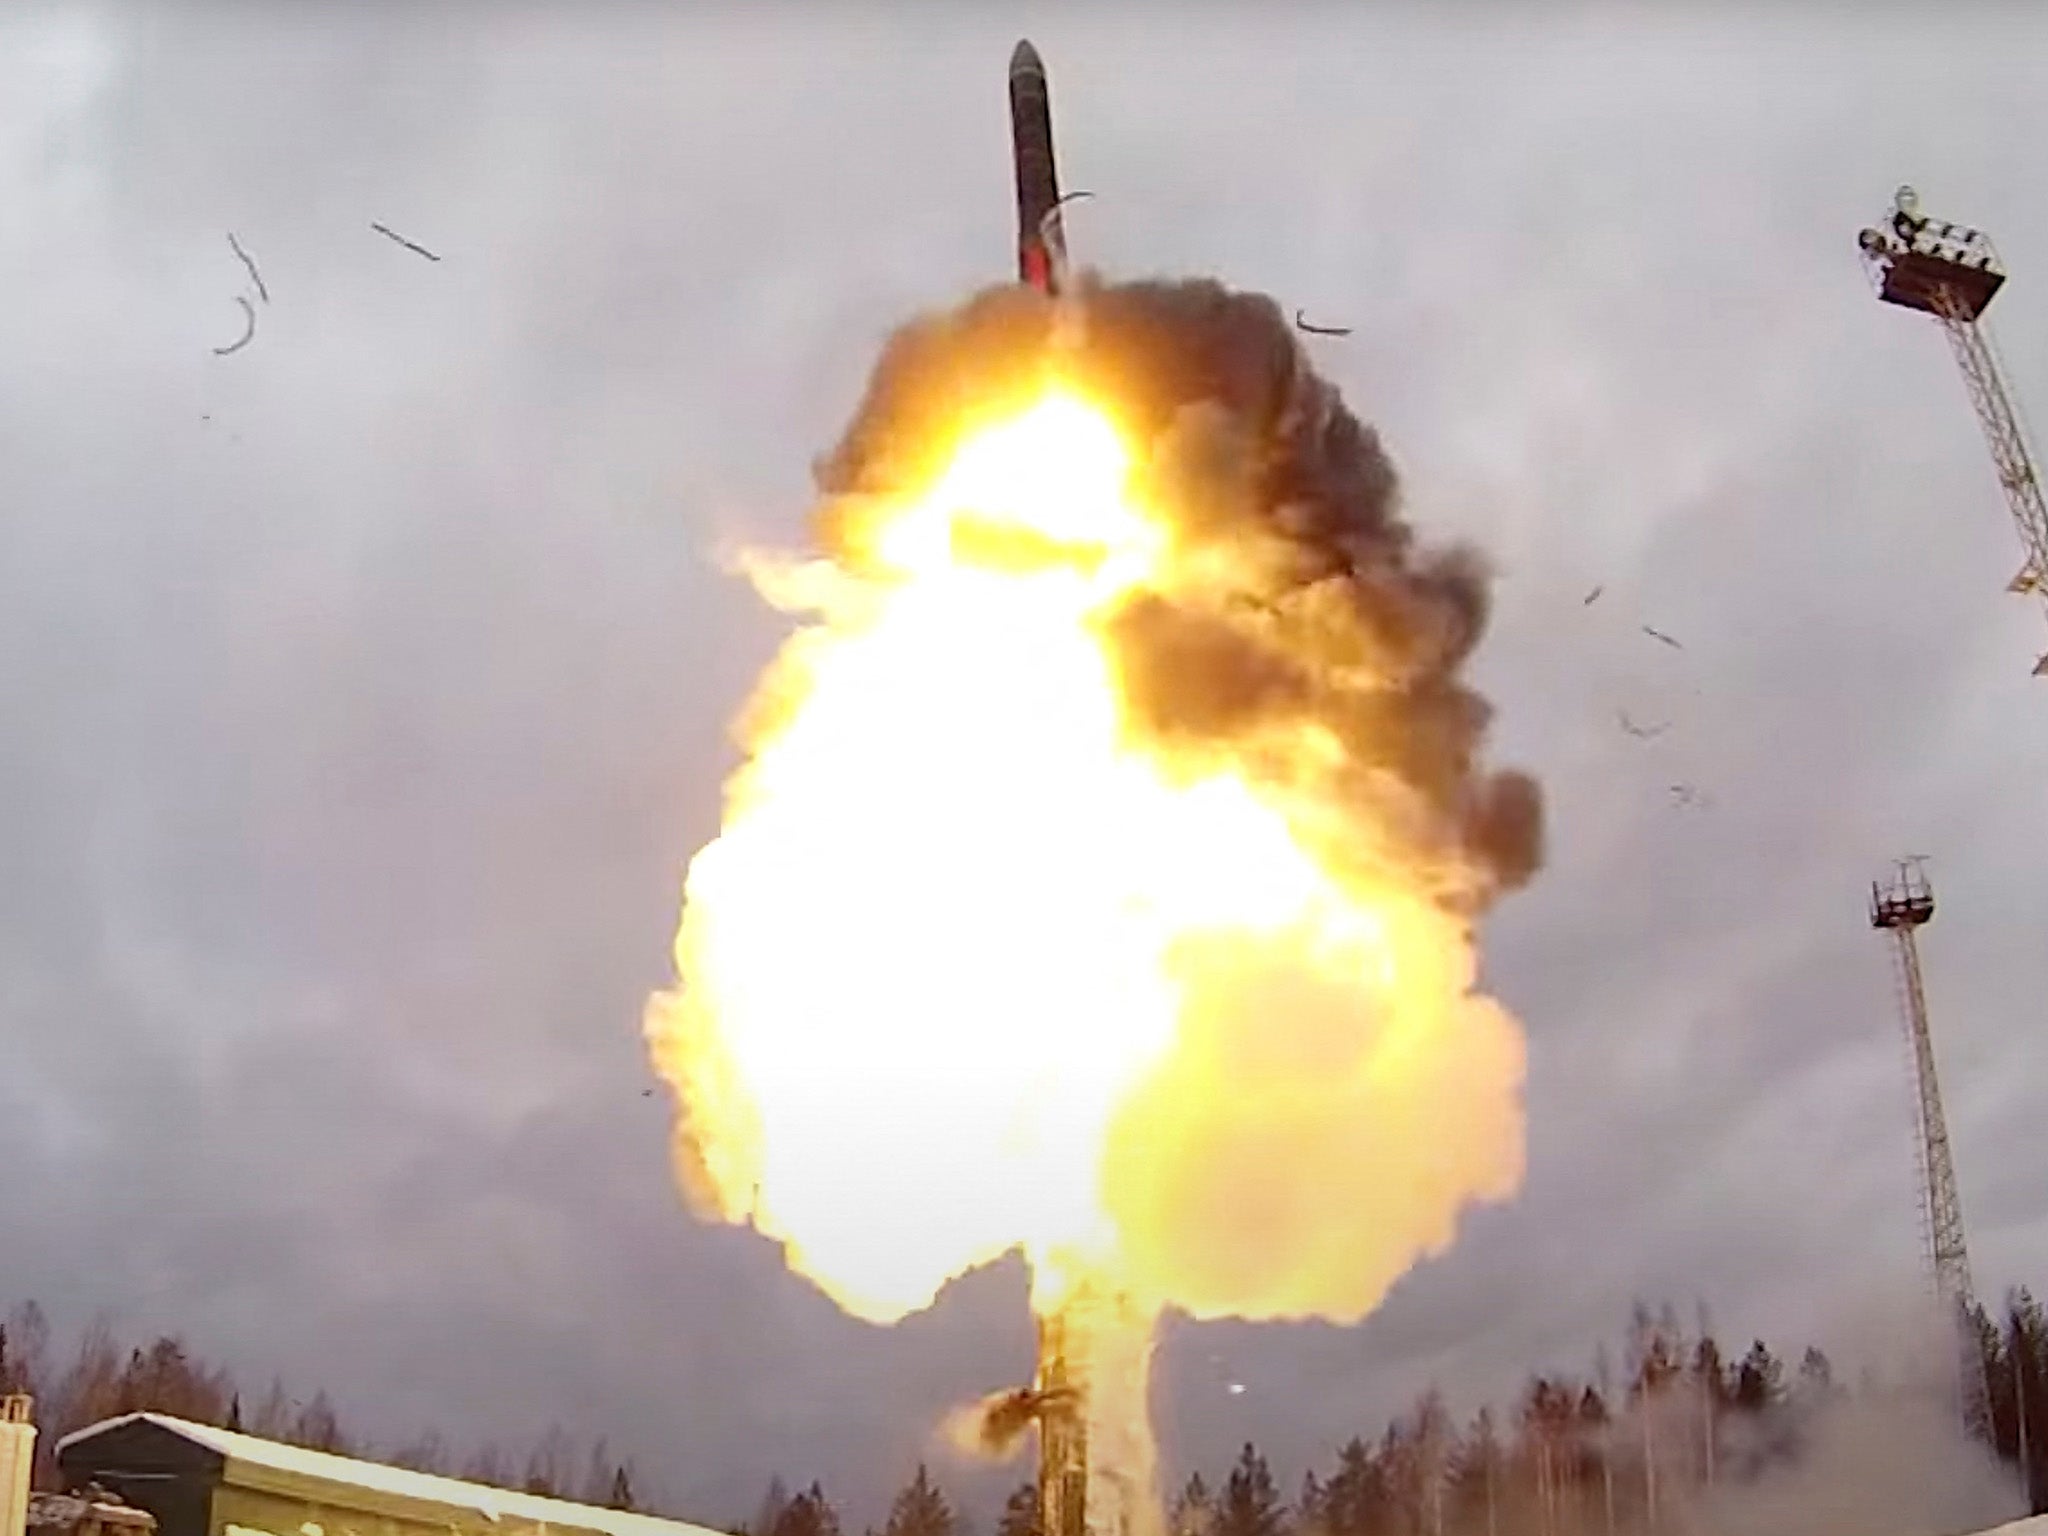 A Russian Yars intercontinental ballistic missile launched during the exercise earlier this month